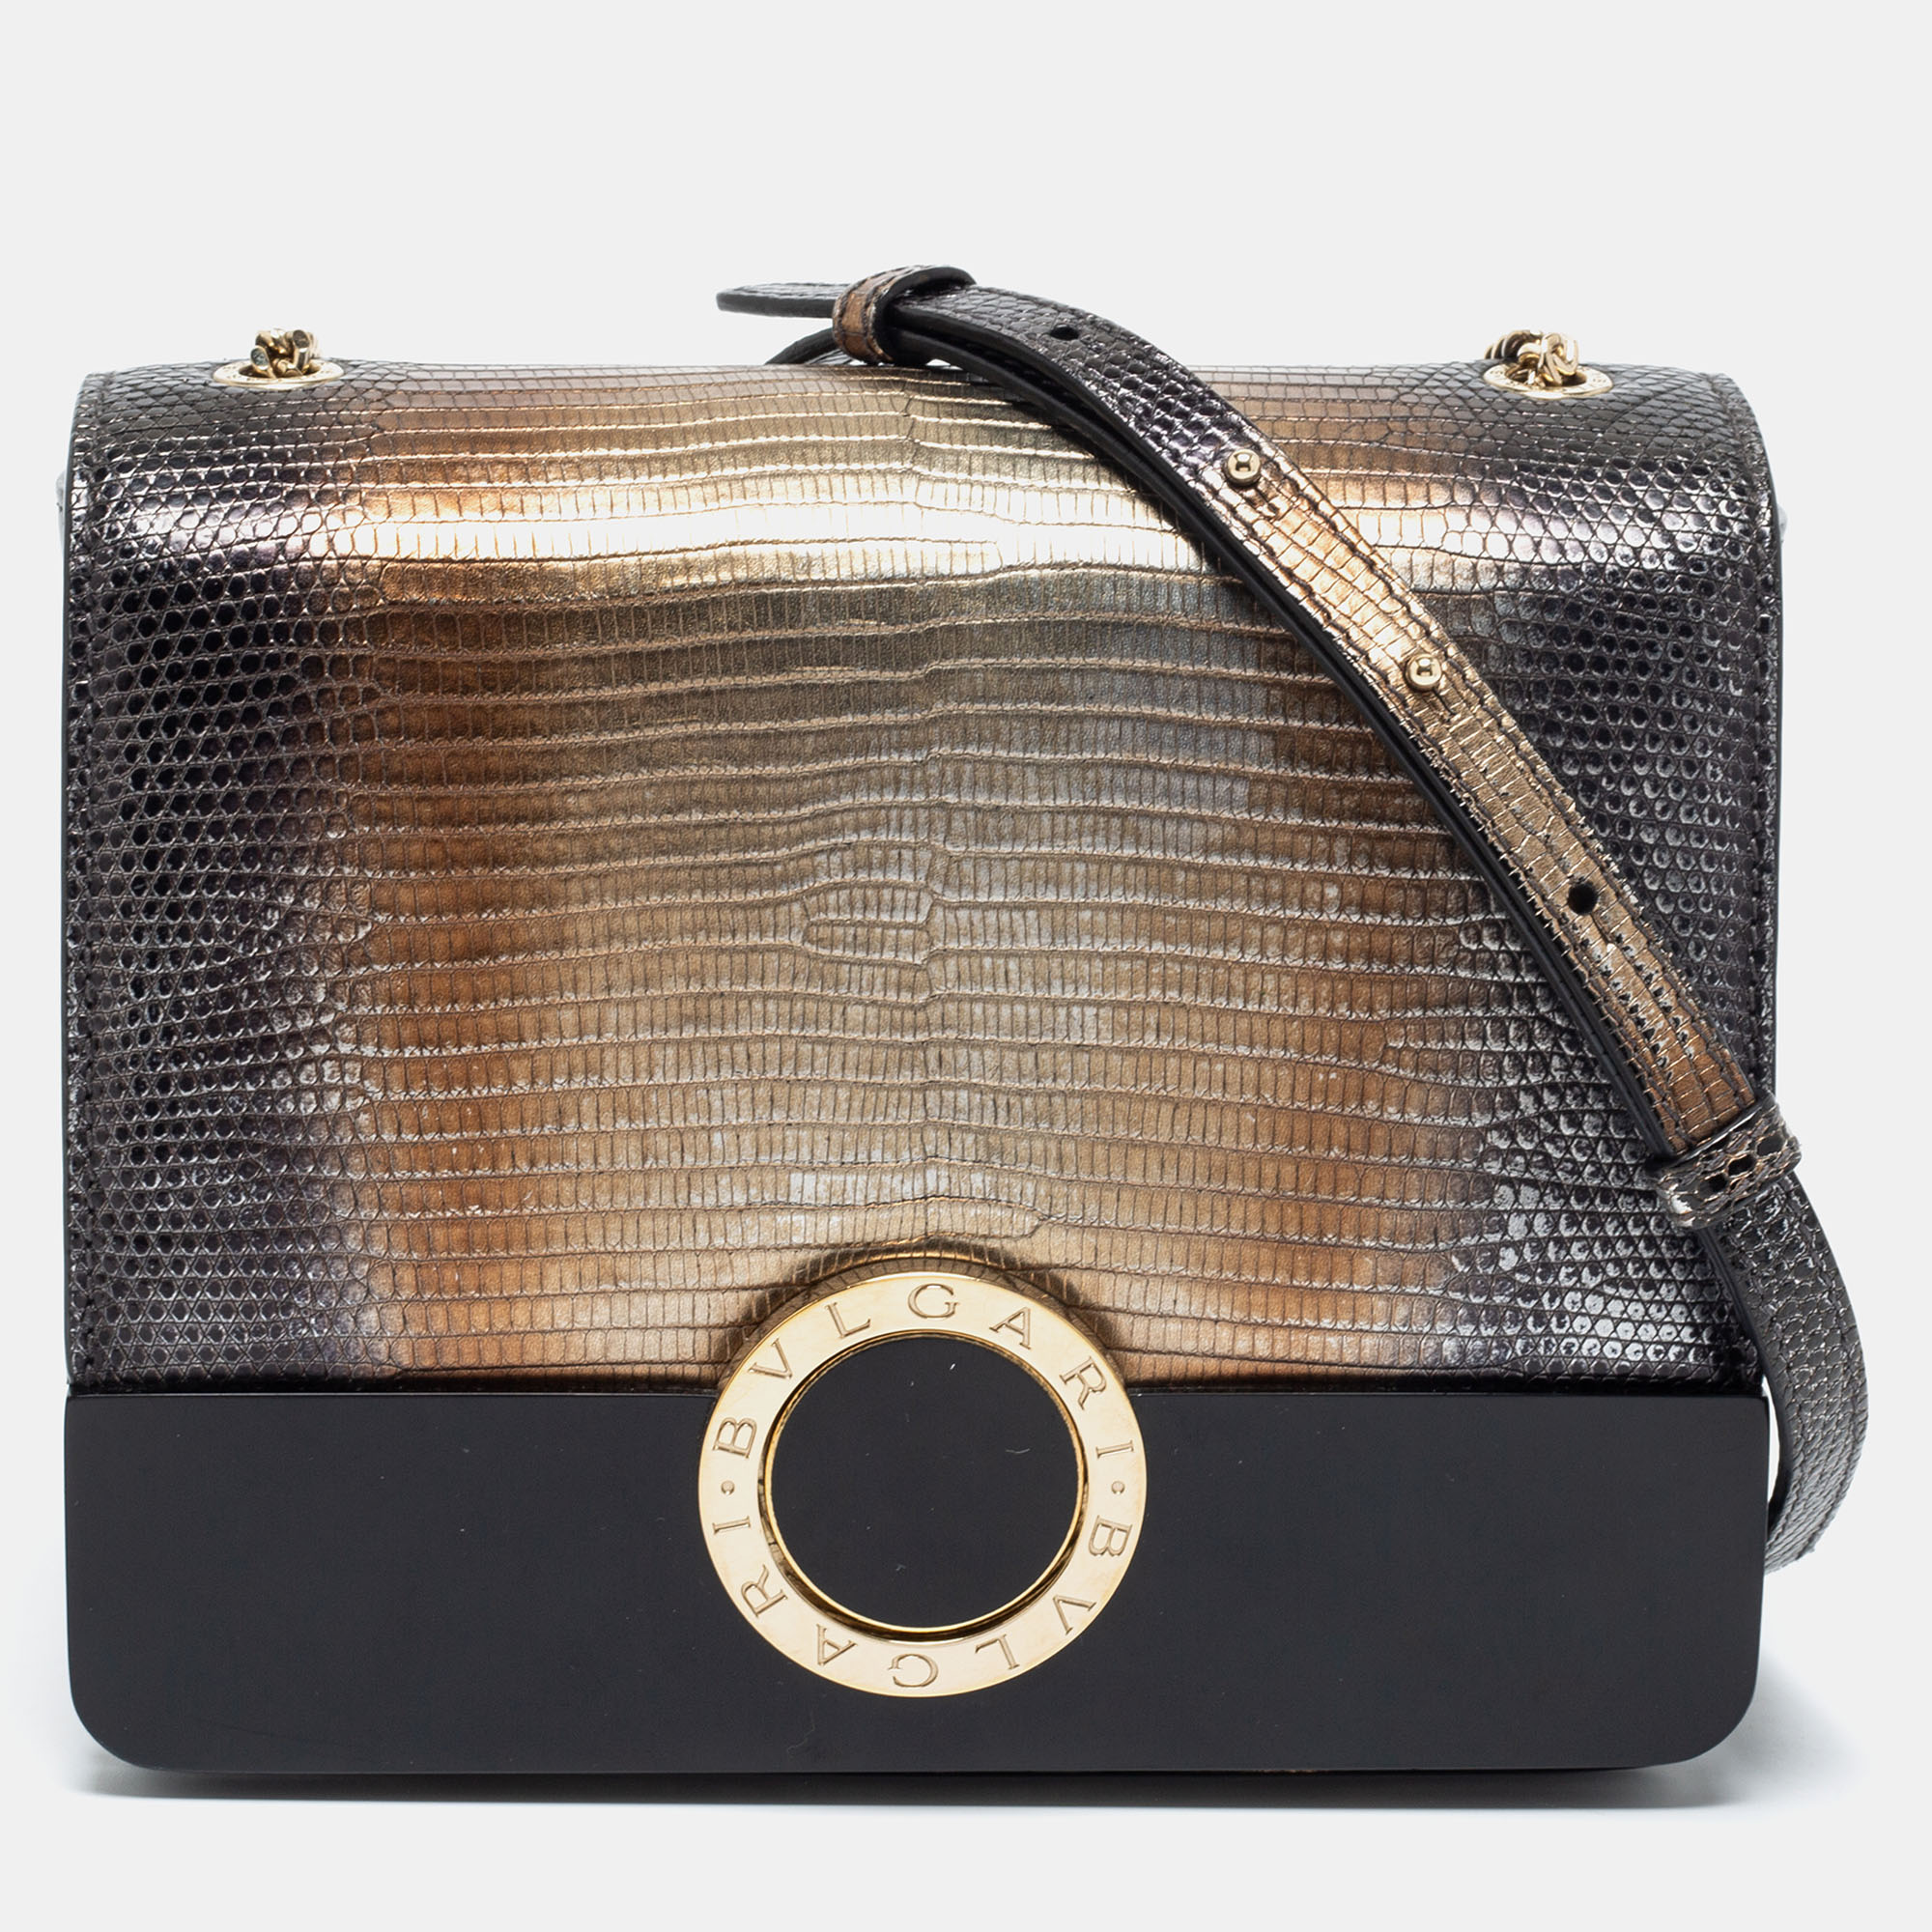 This stunning Bvlgari bag will add luxurious elegance to your style. Flawlessly crafted from lizard leather and Perspex it features a long shoulder strap and a plush leather lined interior. The branded flap closure on the front adds charm to its structured silhouette.